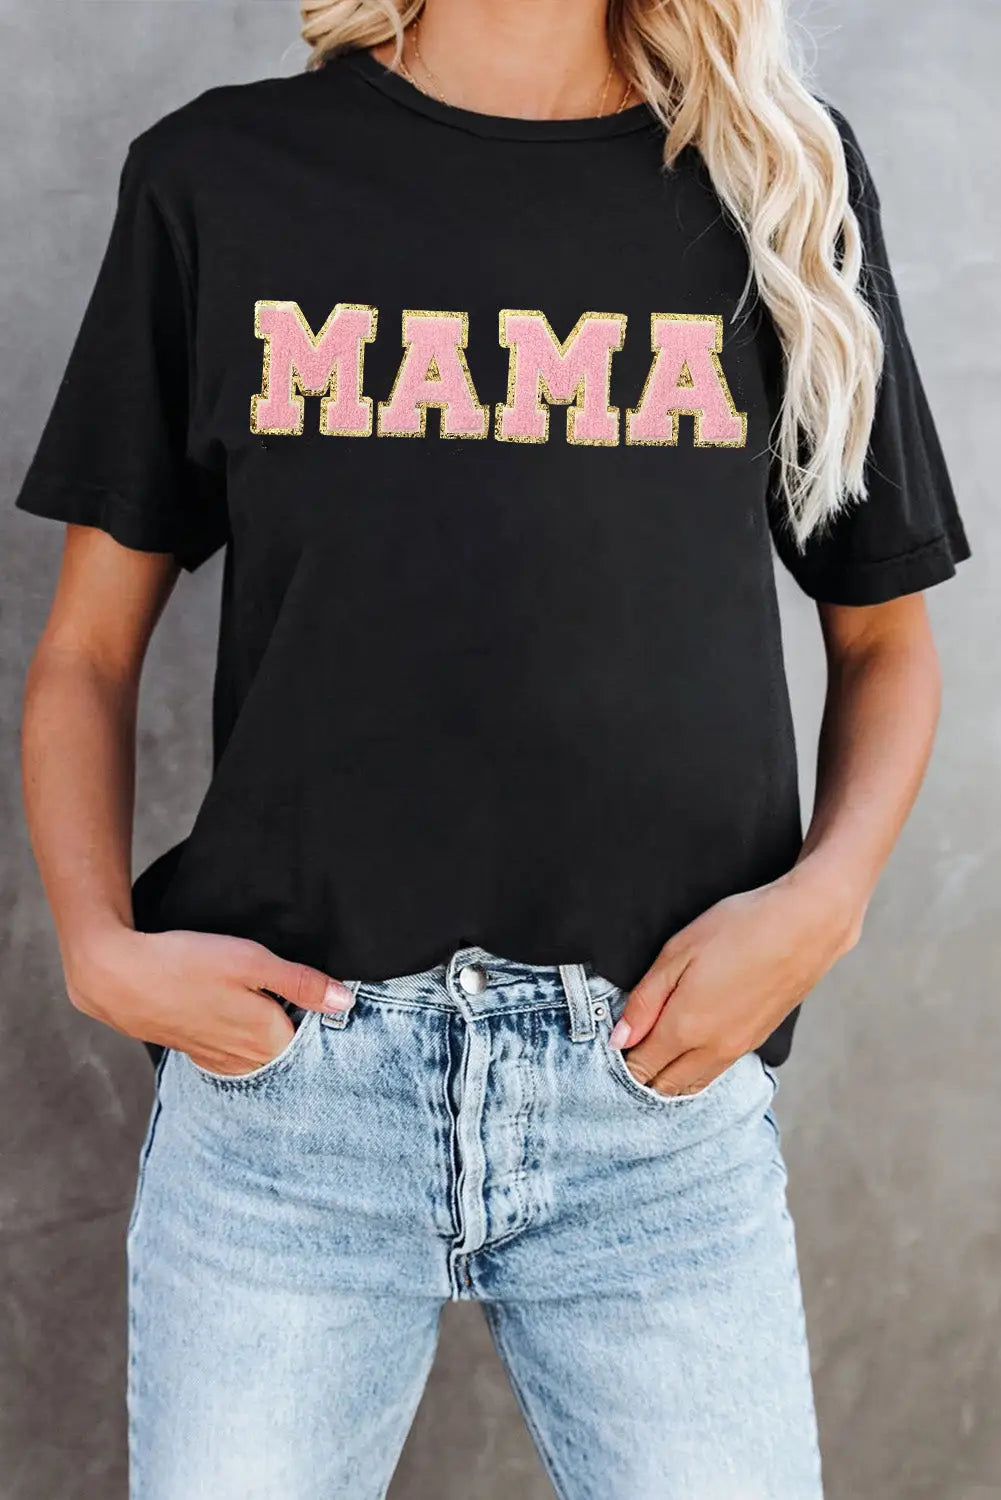 Black mama chenille graphic tee - s 62% polyester + 32% cotton + 6% elastane t - shirts